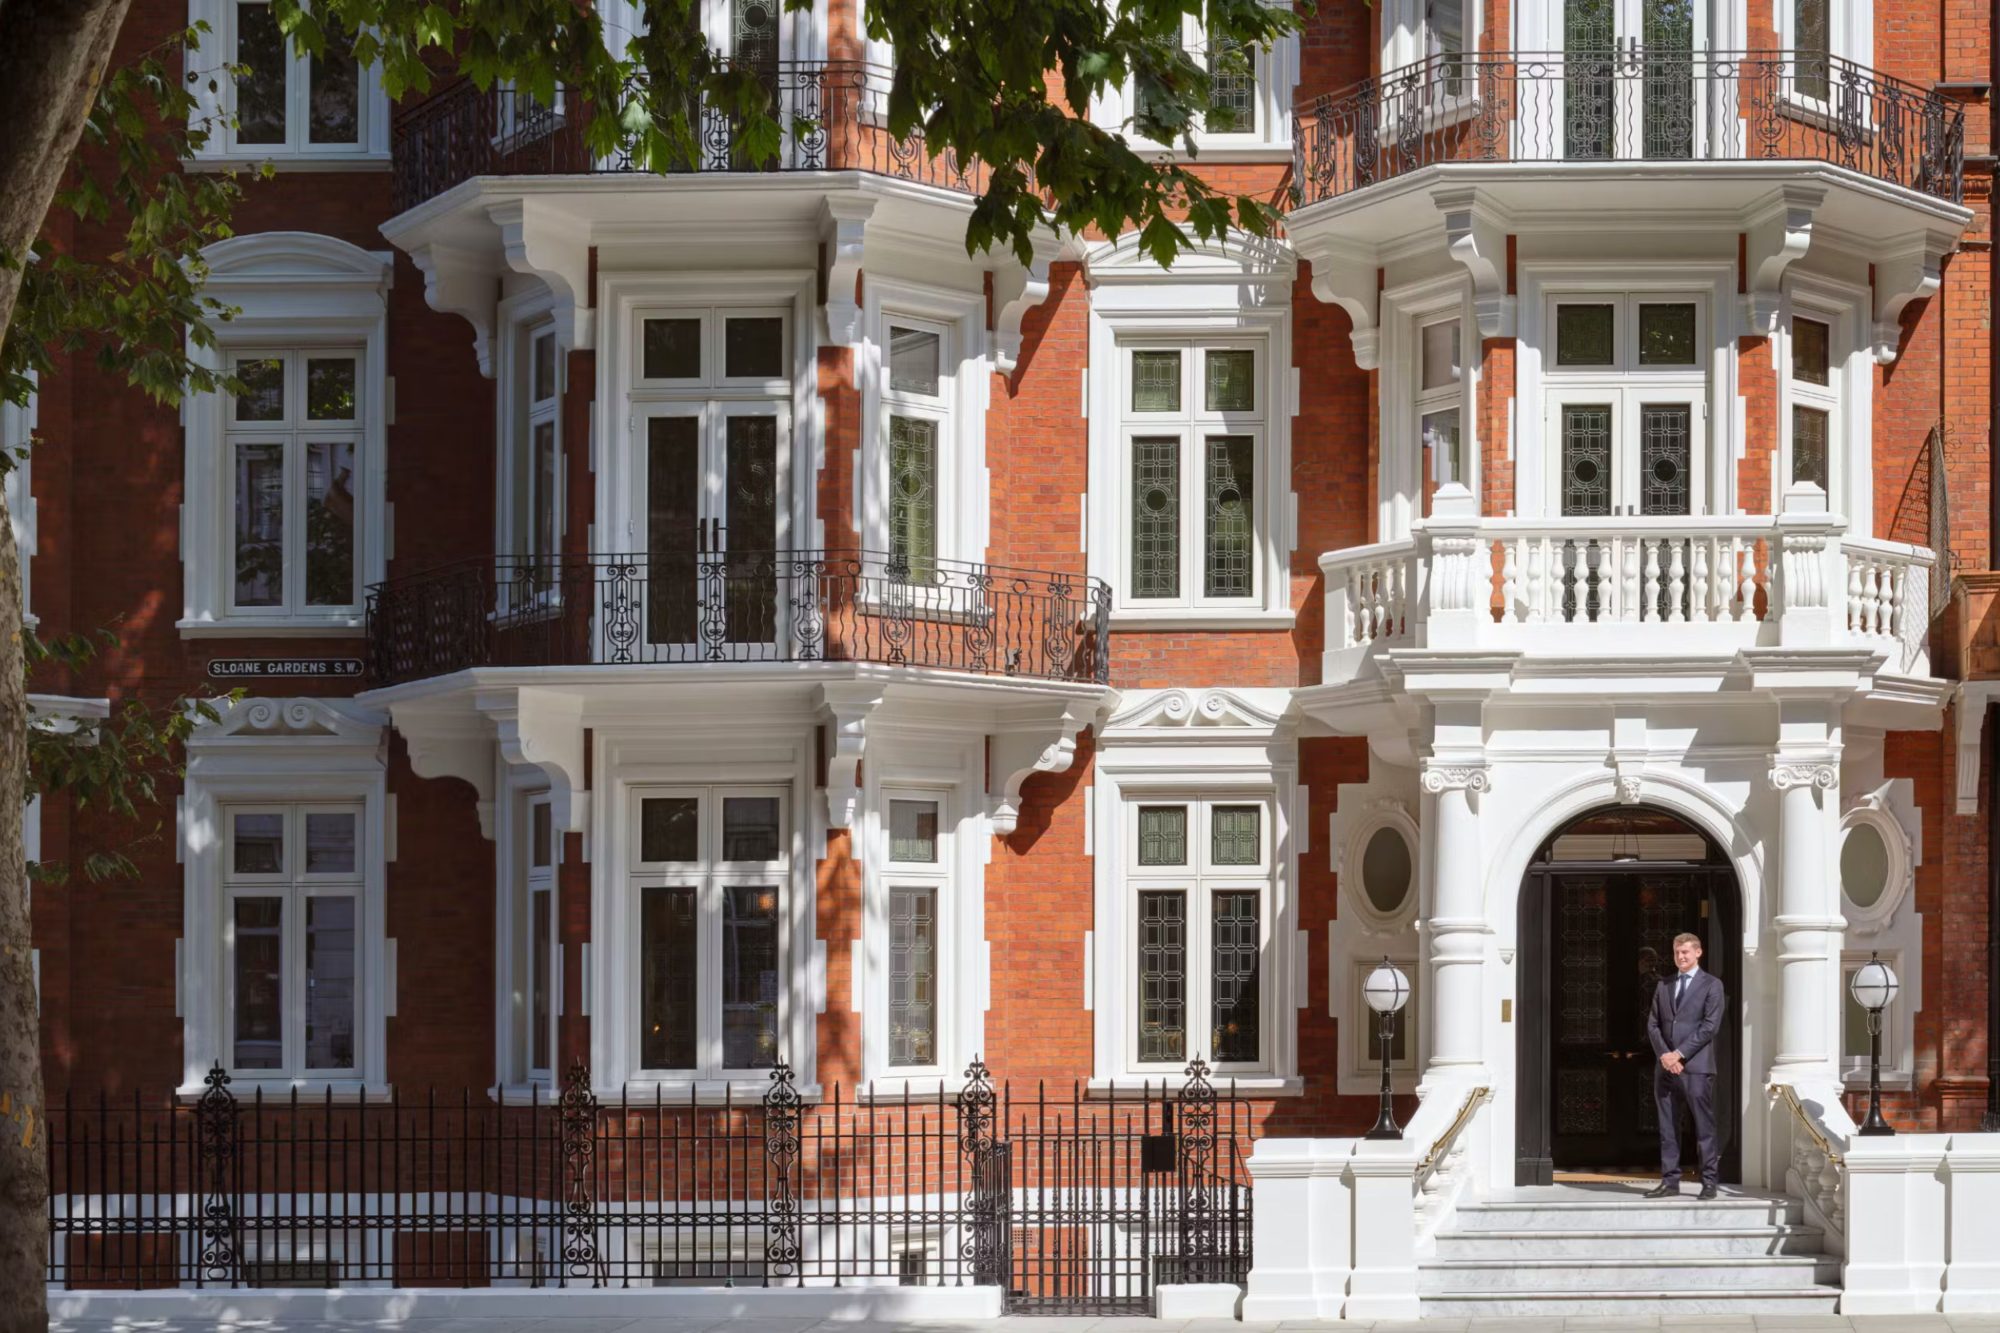 Set within an elegant Victorian mansion, One Sloane is London’s new address for boutique luxury